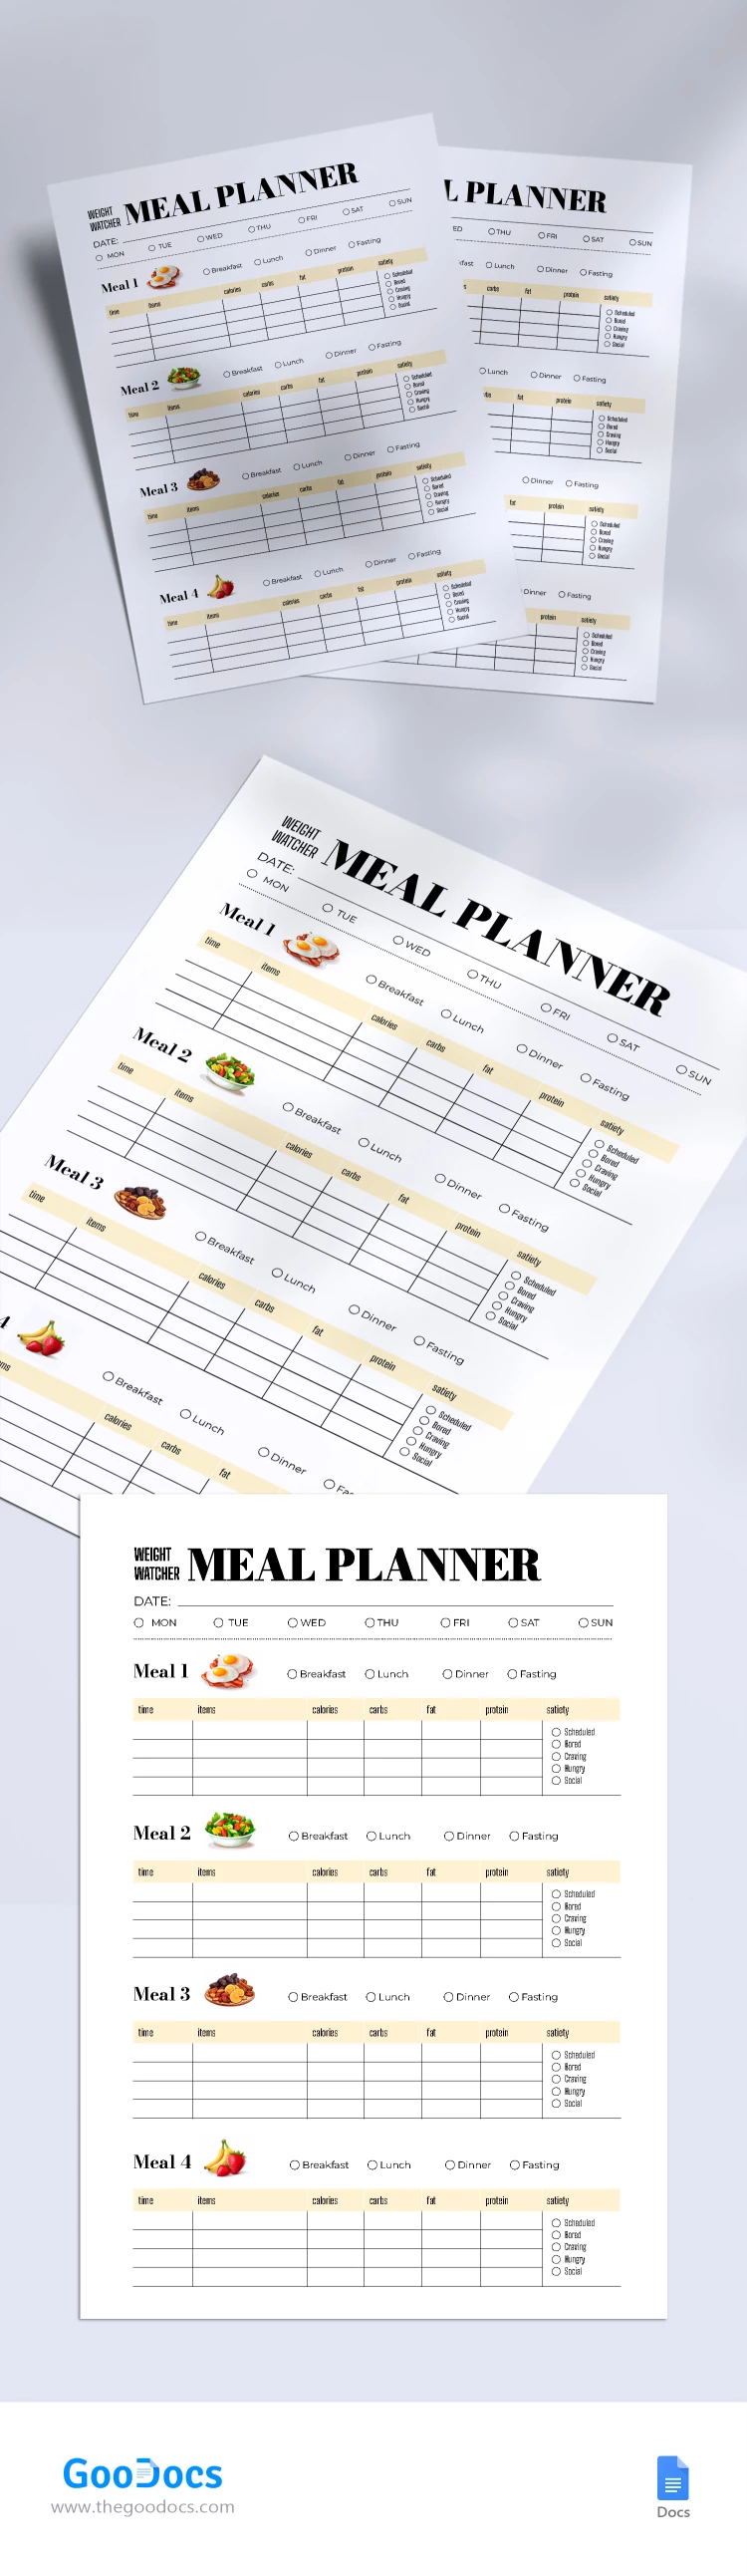 Weight Watchers Daily Meal Planner - free Google Docs Template - 10068220